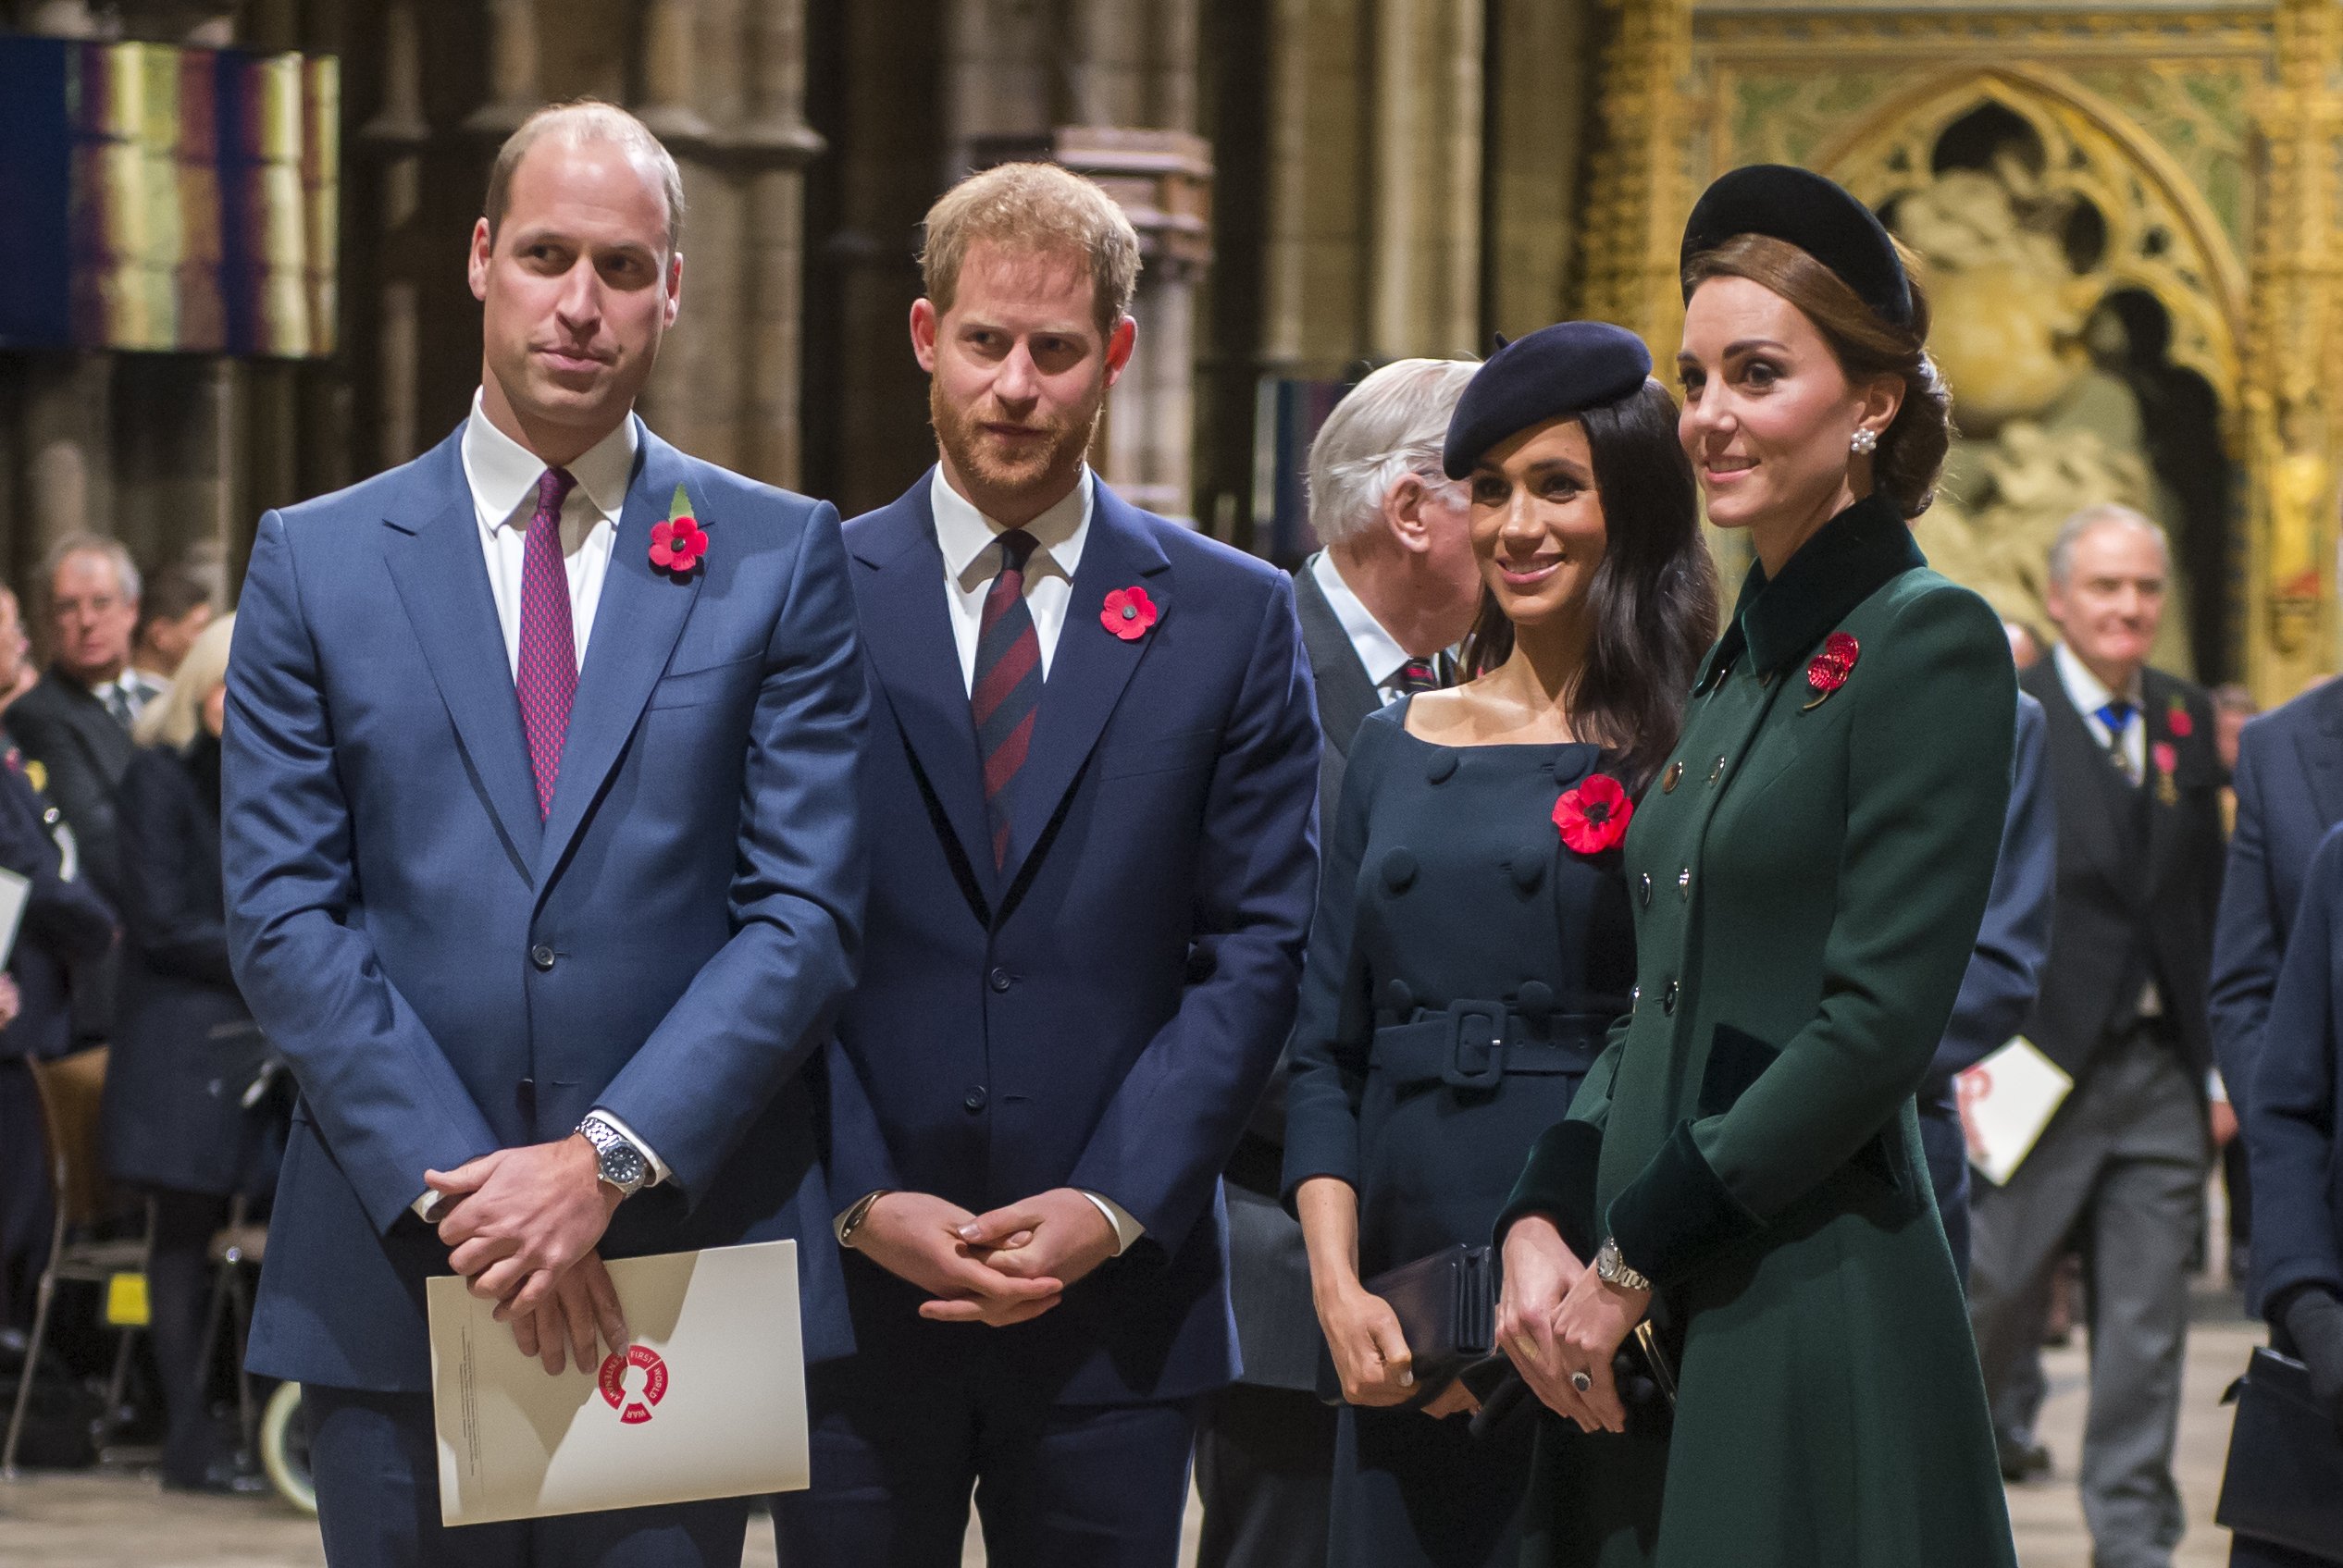 Prince William, Prince Harry, Meghan Markle, and Kate Middleton attend the WW1 armstice centenary event in London, England on November 11, 2018 | Photo: Getty Images